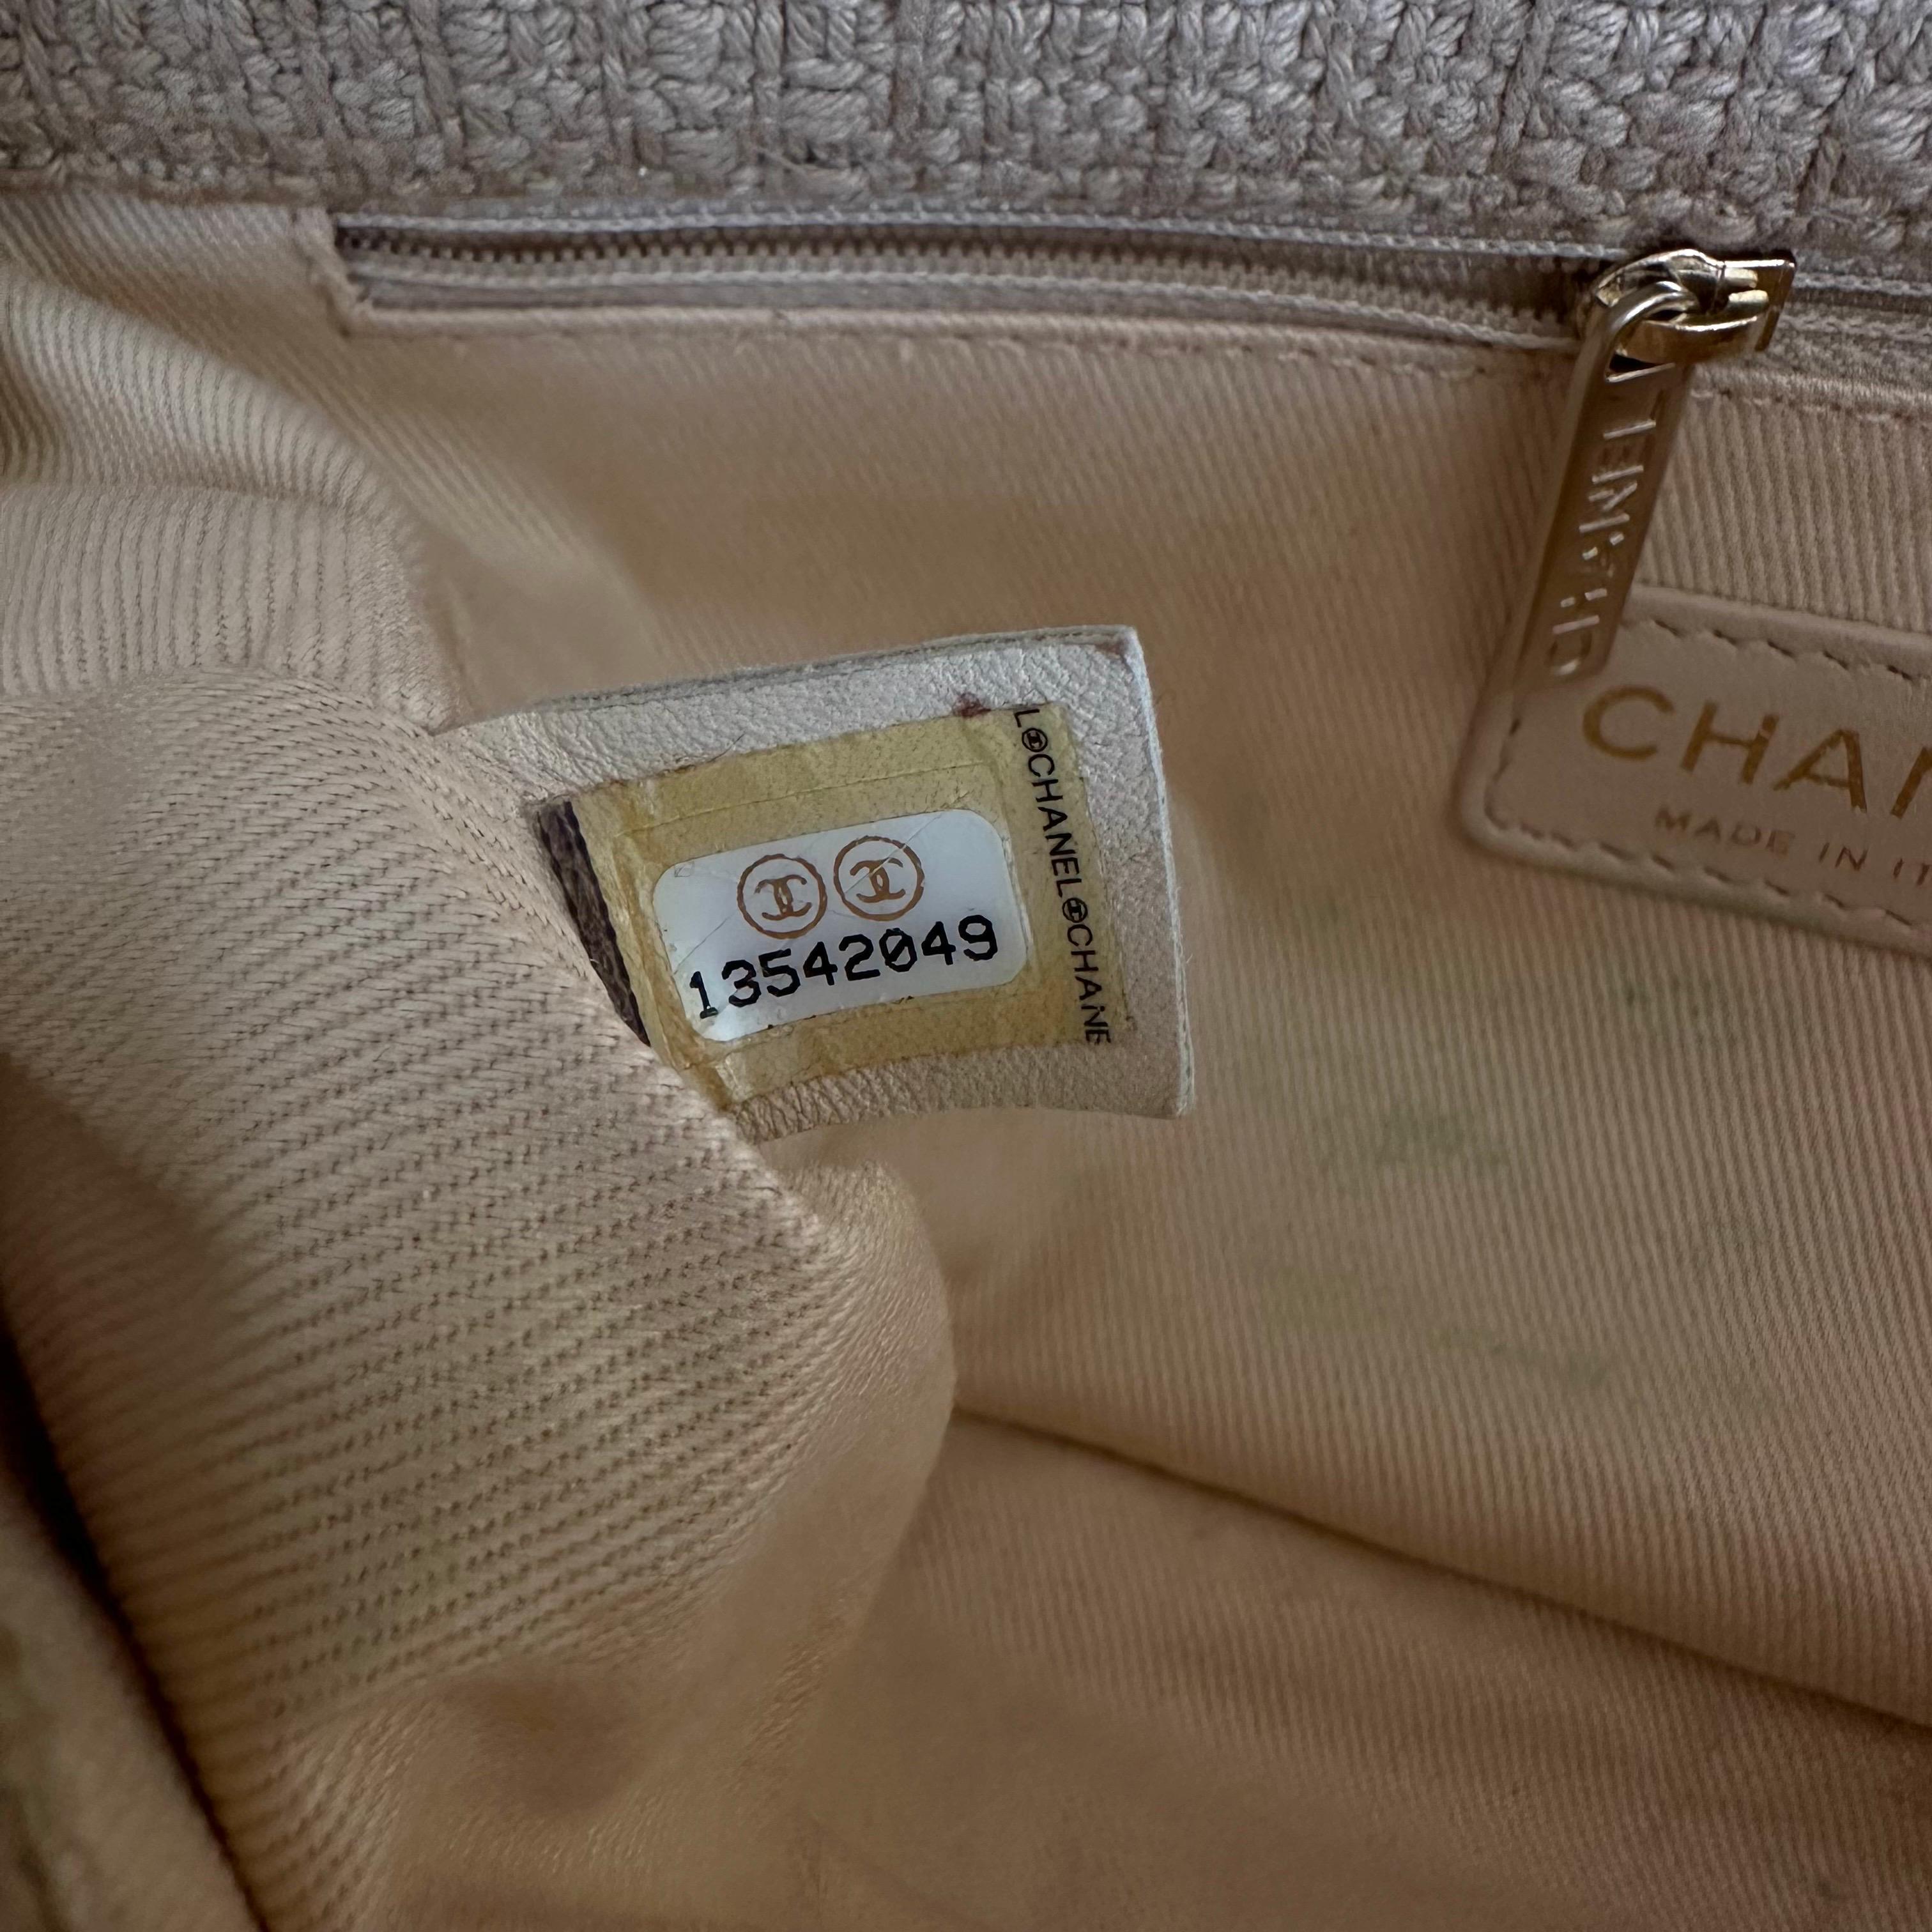 Chanel 2009 Small Sized Beige Tweed Fringe Organic Crochet Nature Flap Bag For Sale 12